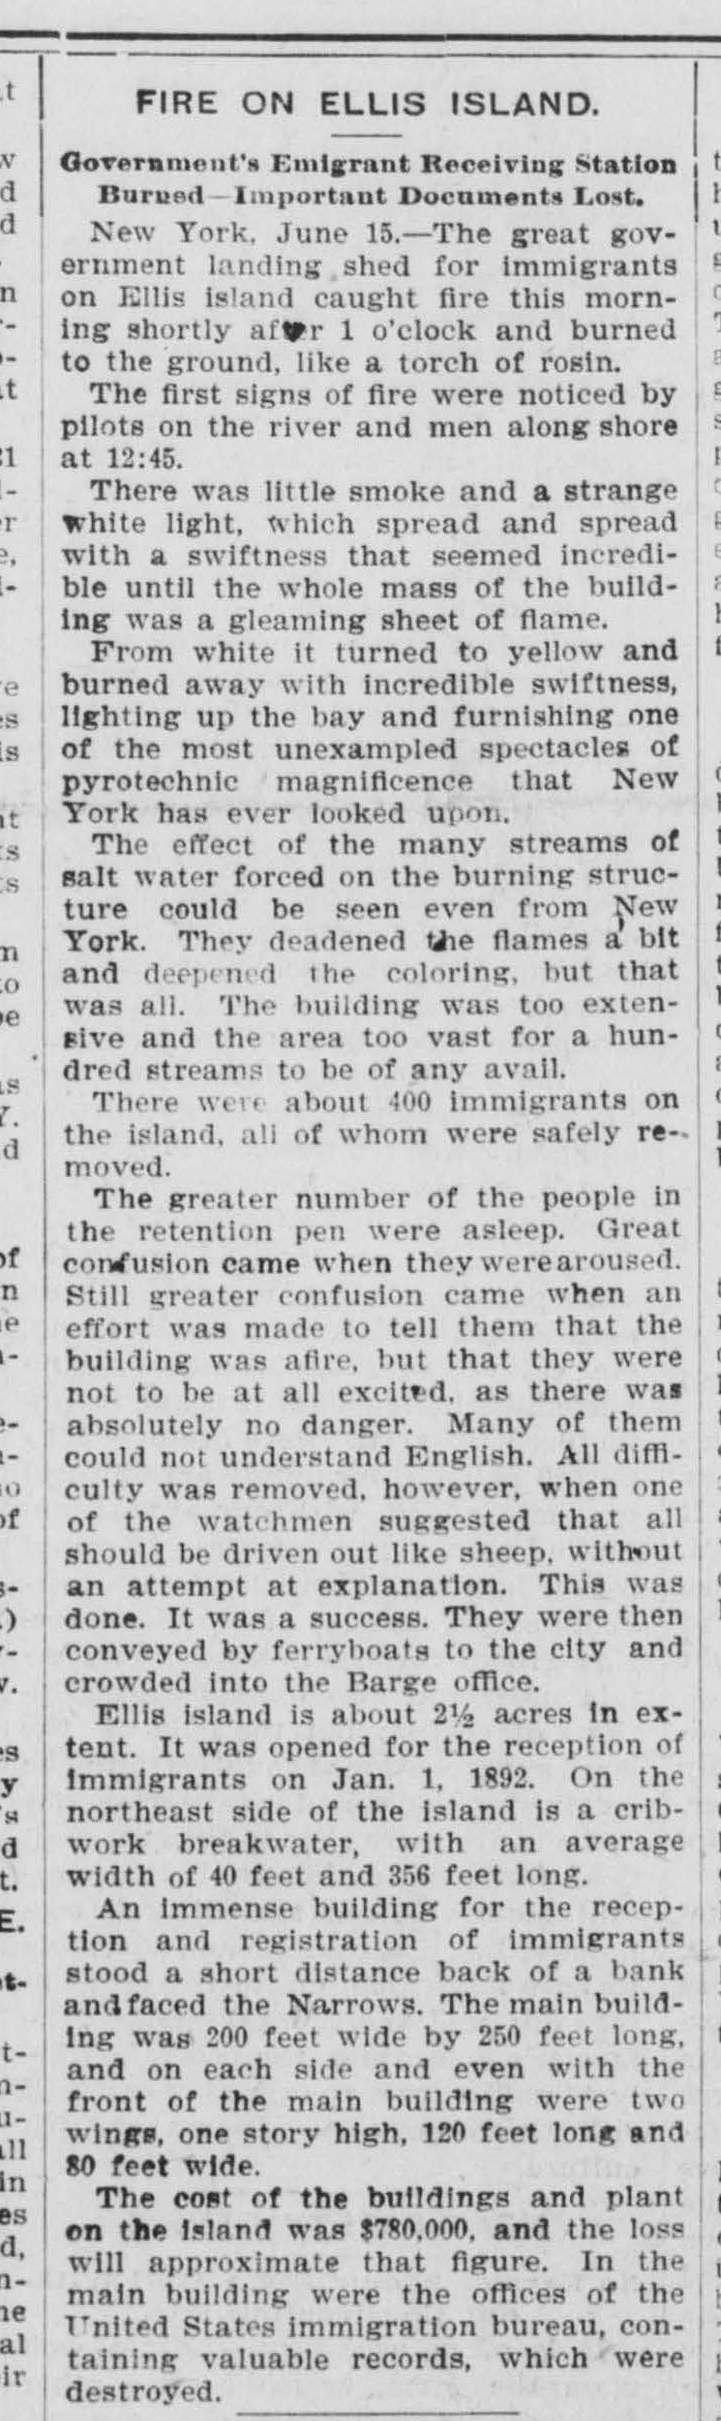 Newspaper article about the fire on Ellis Island